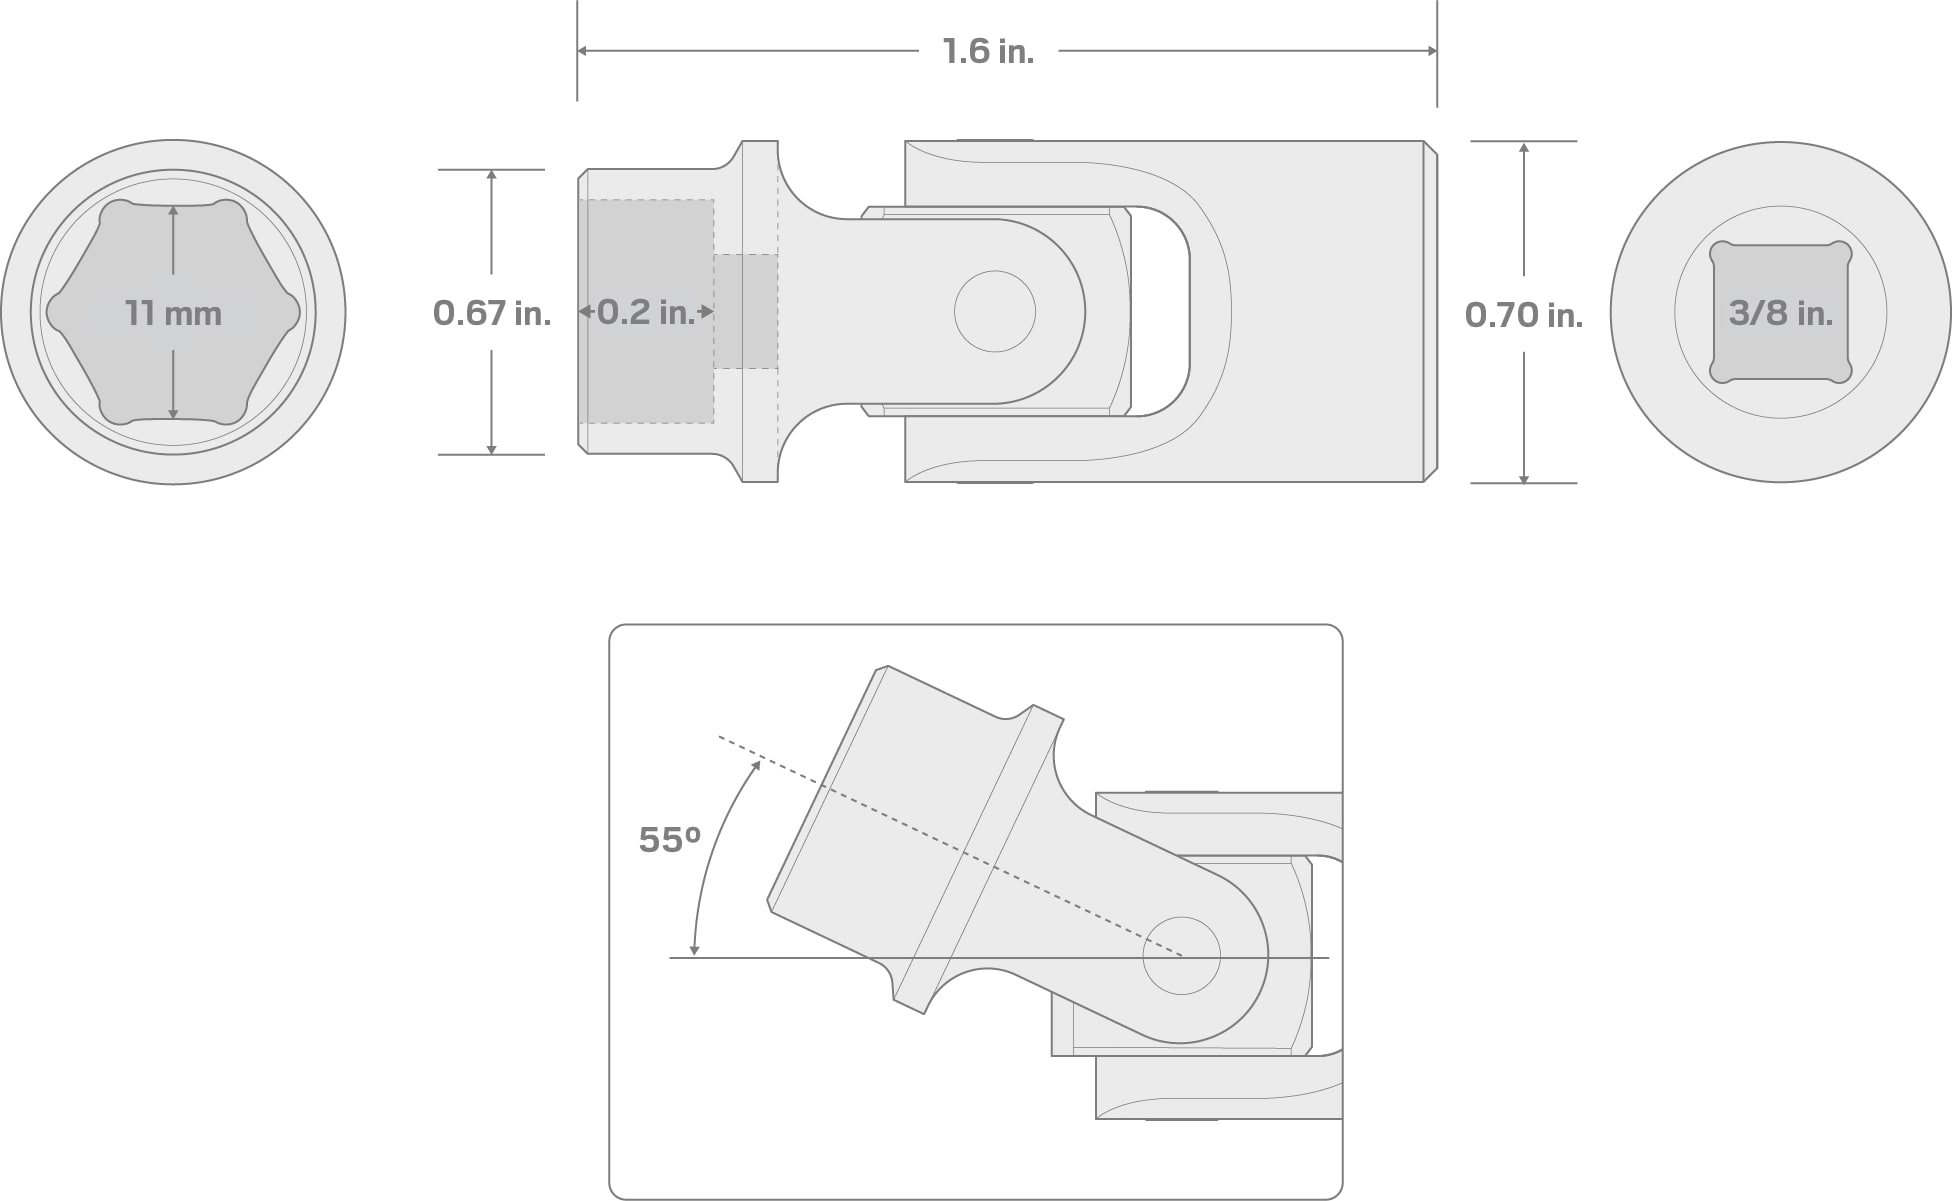 Specs for 3/8 Inch Drive x 11 mm Universal Joint Socket